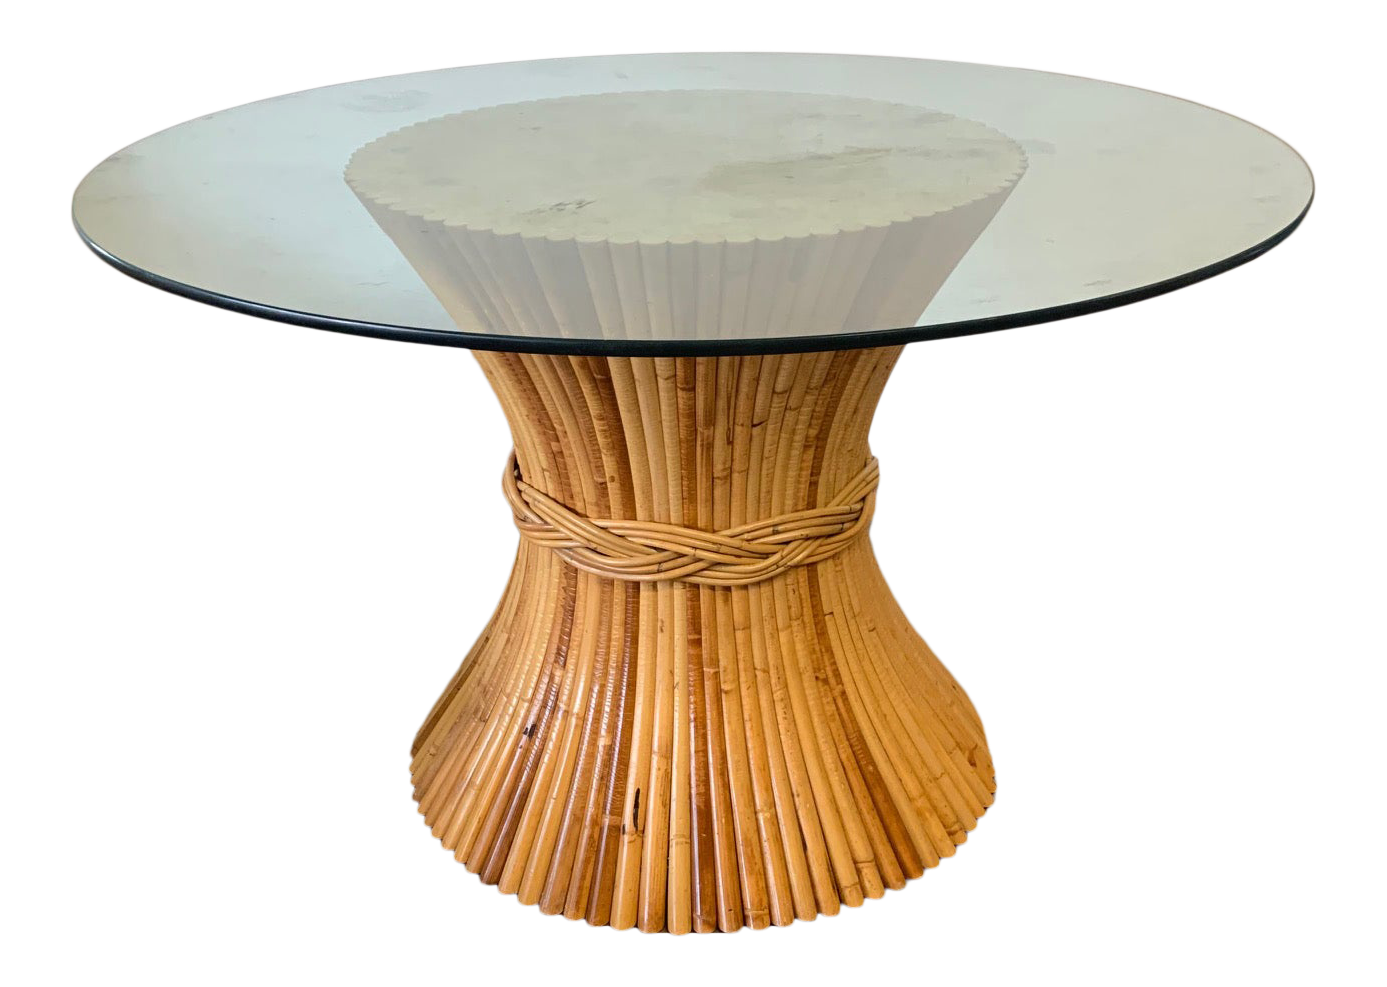 Sheaf of Wheat Bamboo Pedestal Dining Table by McGuire